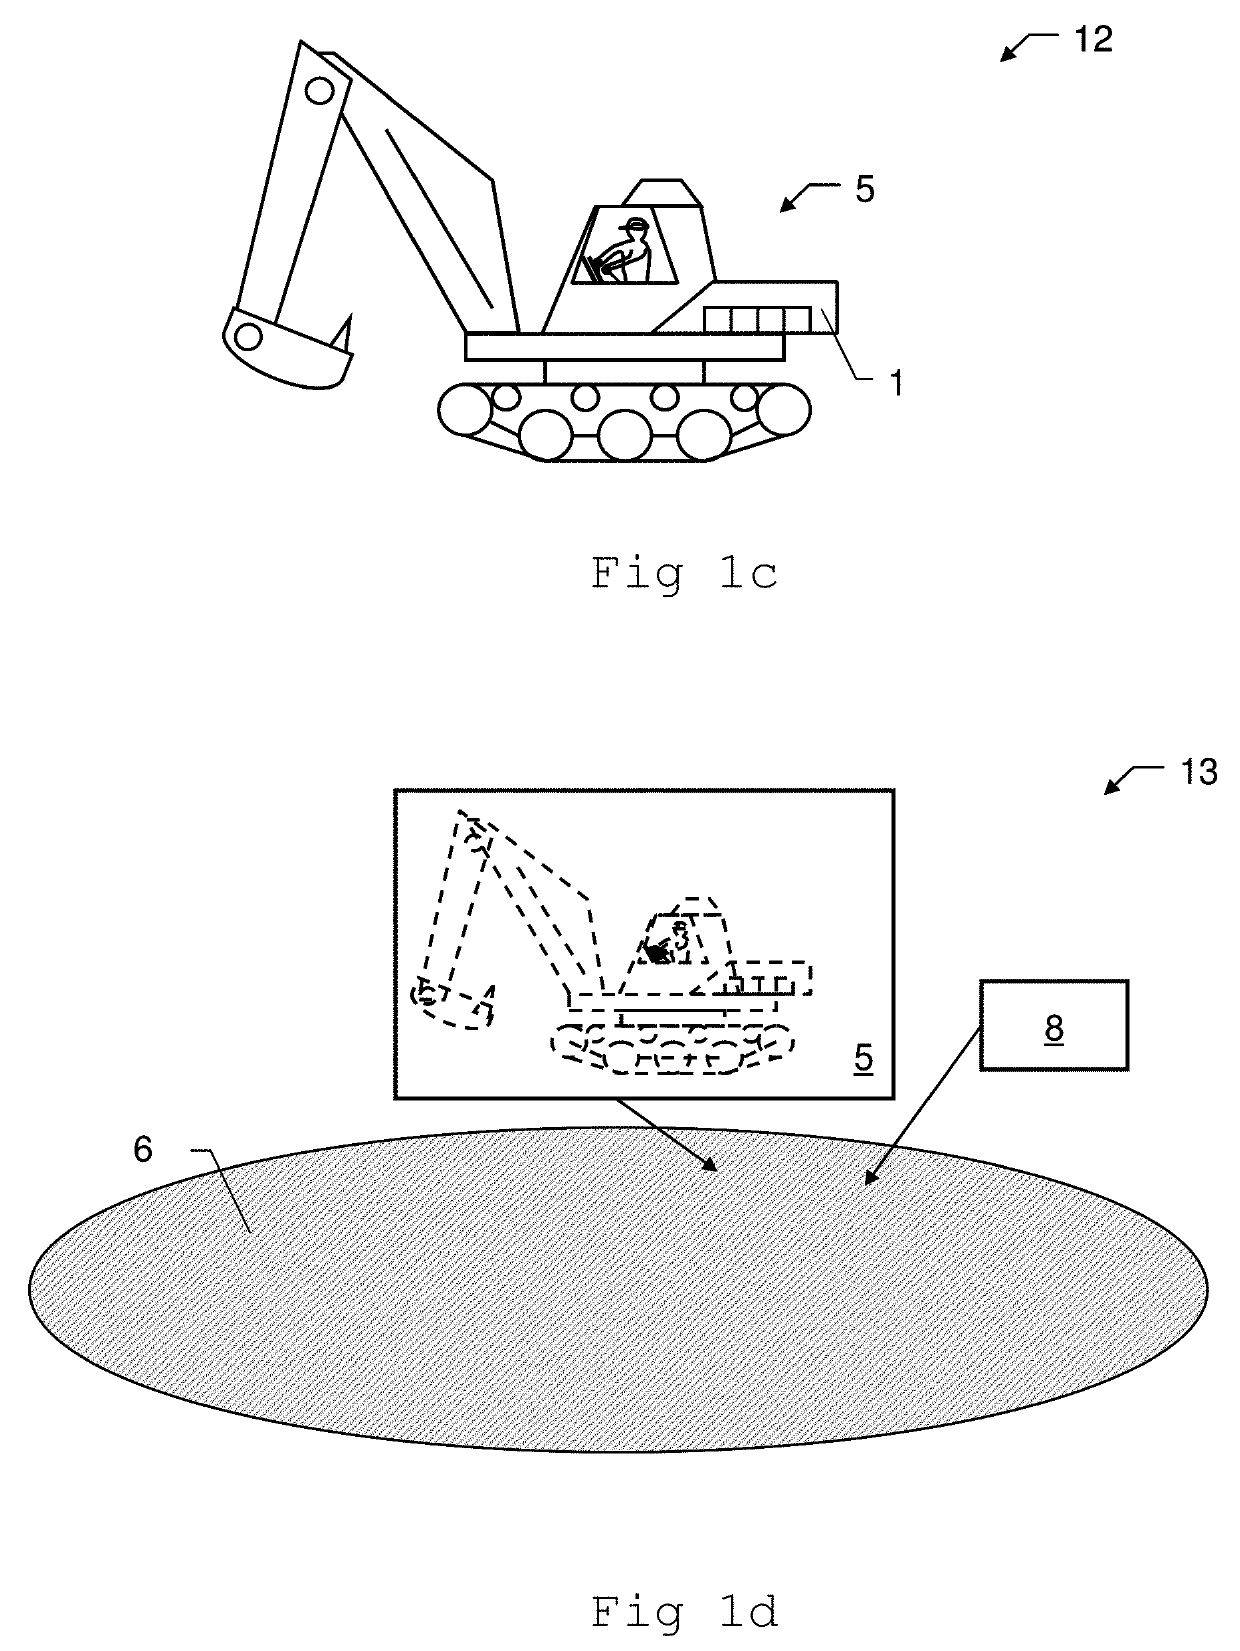 Method and device for augmenting a person's view of a mining vehicle on a mining worksite in real-time